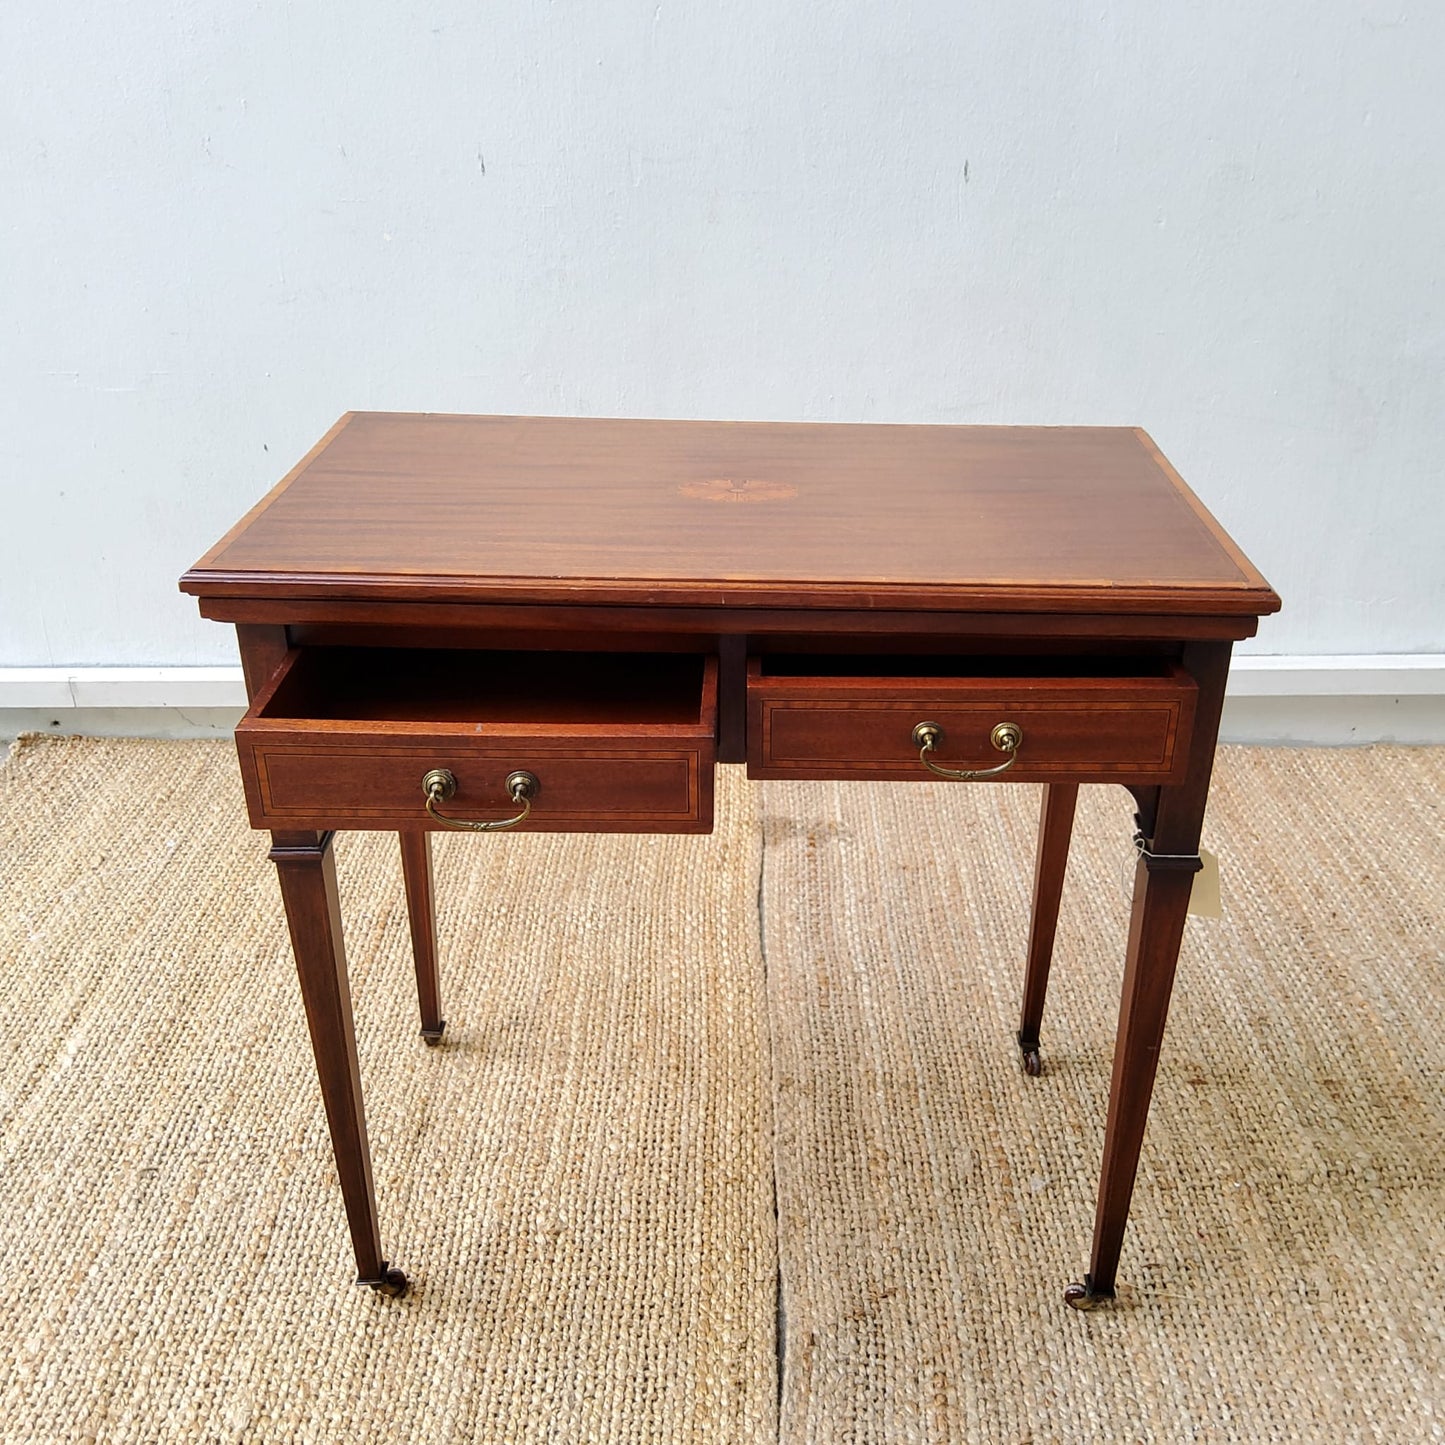 Edwardian inlaid Mahogany card table with two draws, fold out top, square tapering legs